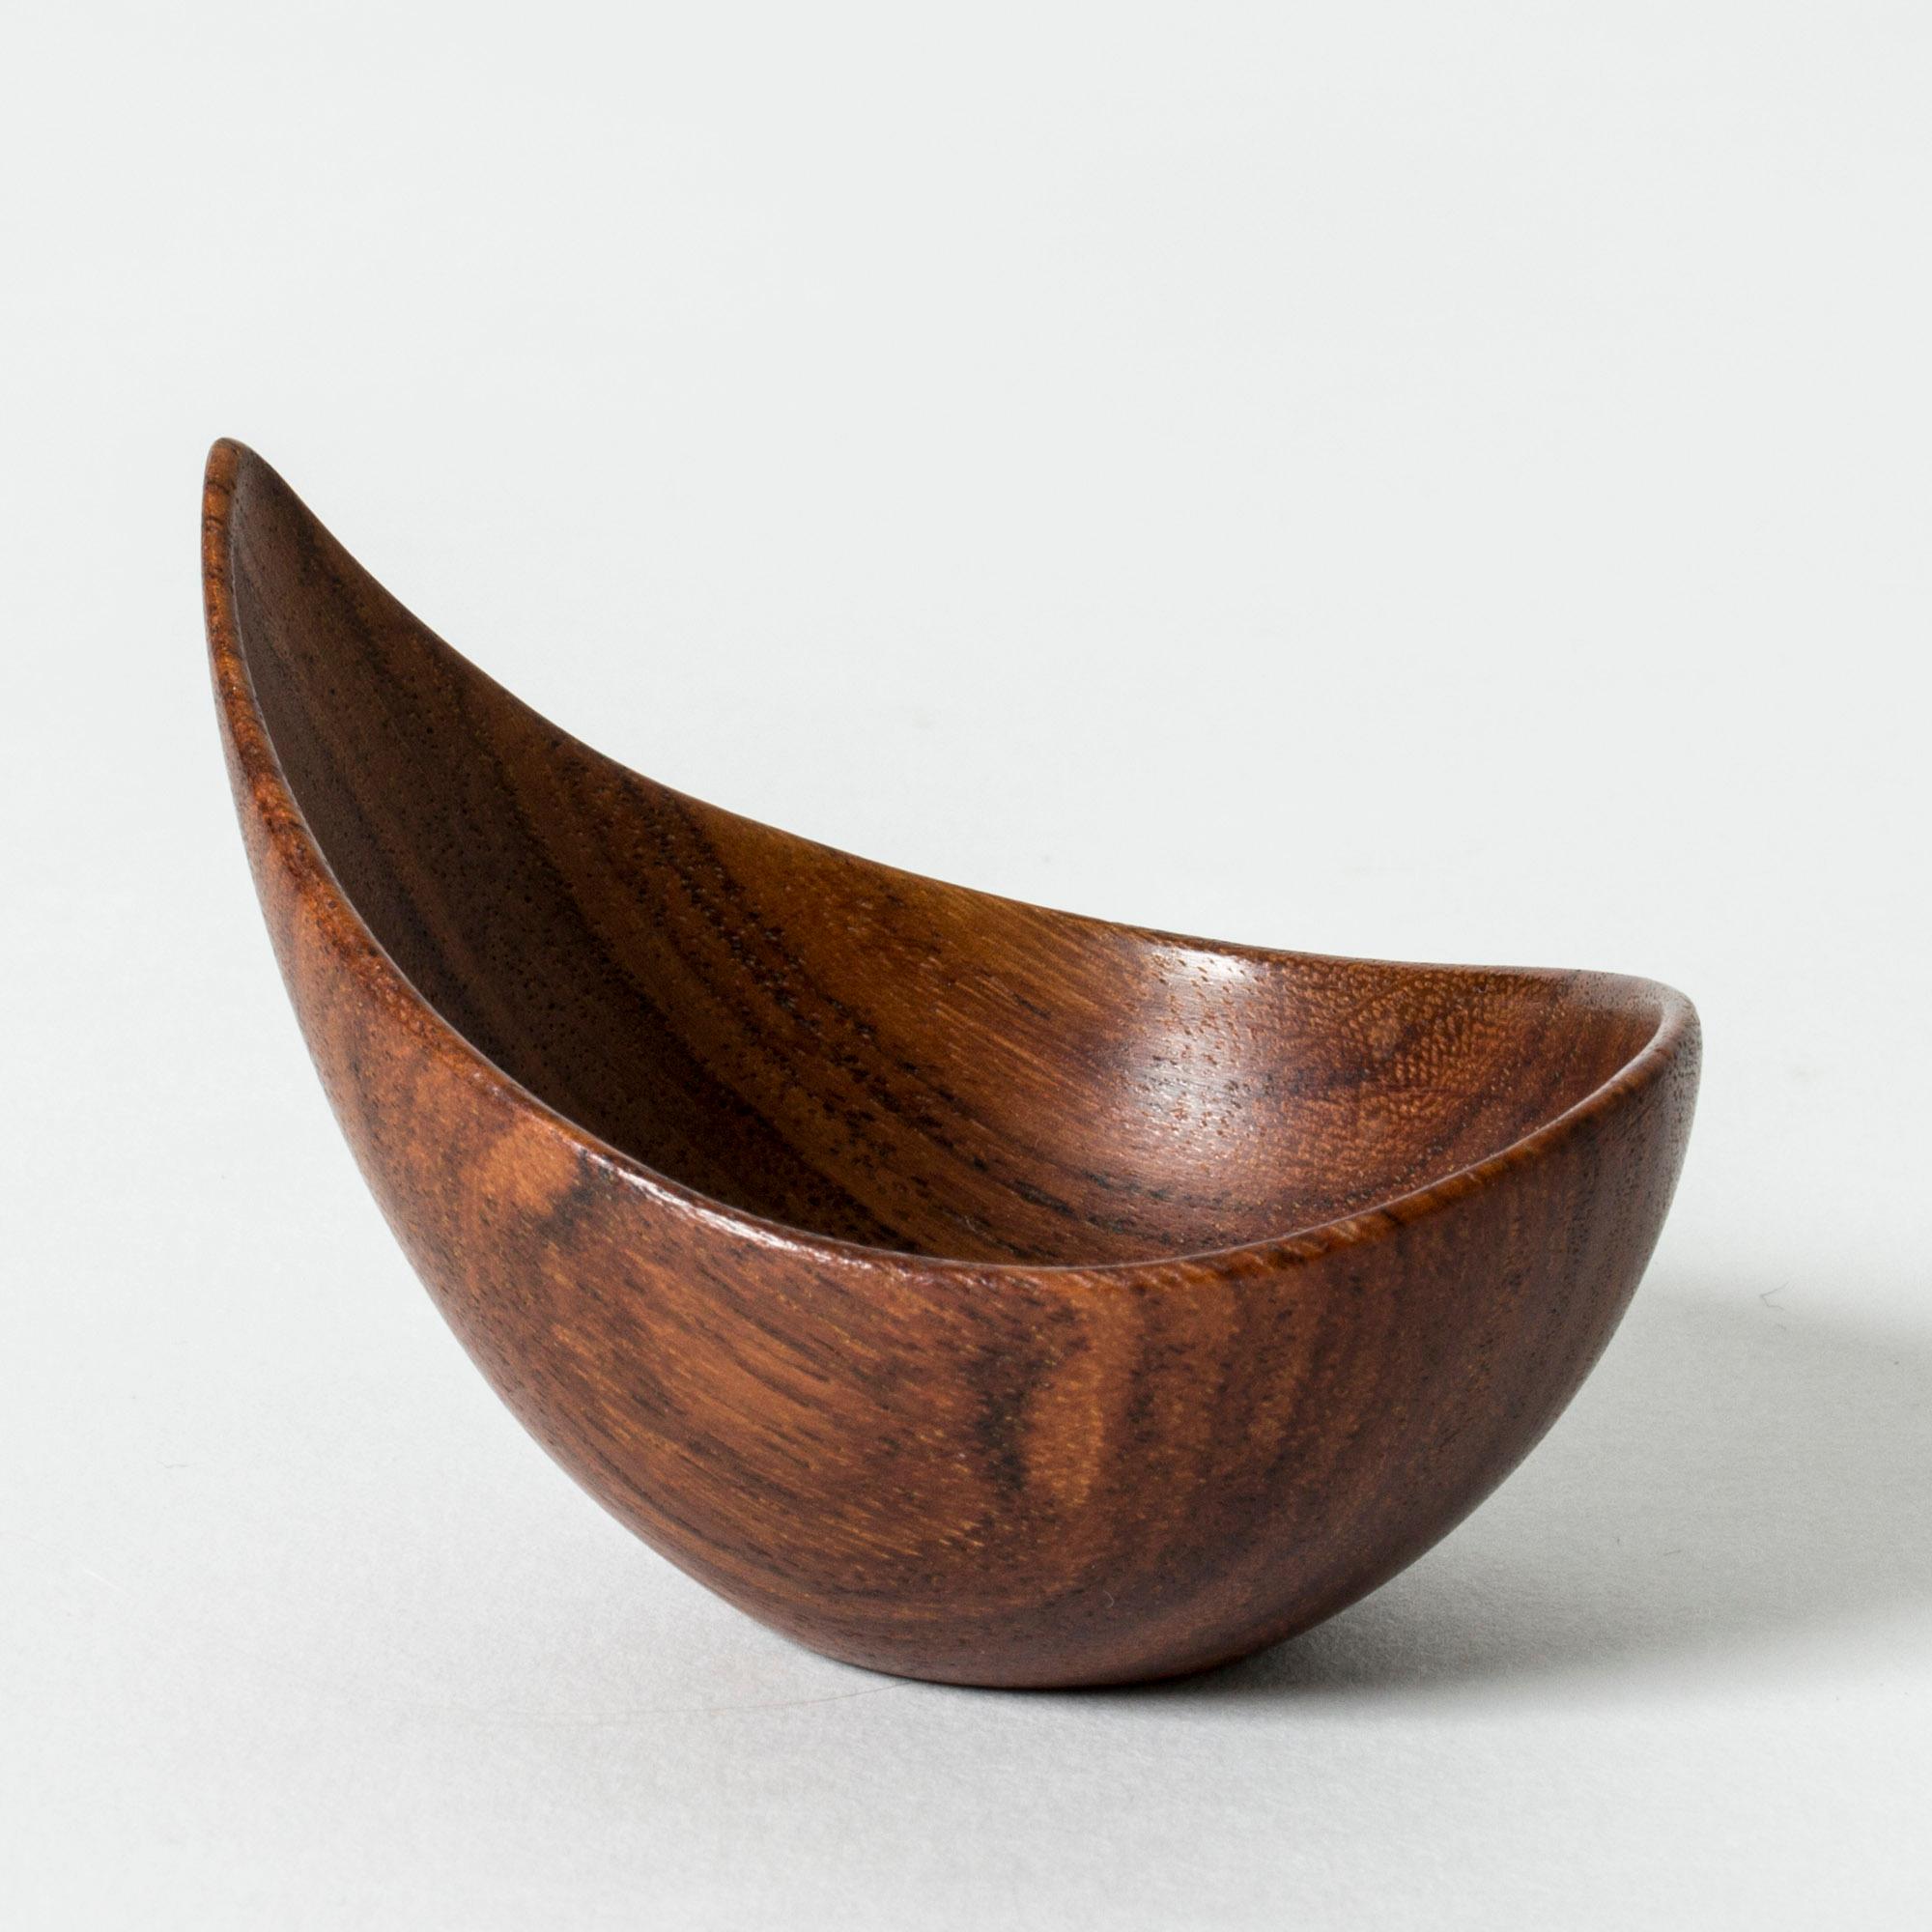 Lovely small bowl by Johnny Mattsson, sculpted from rosewood in a drop-like design. Delicately made, beautiful woodgrain.